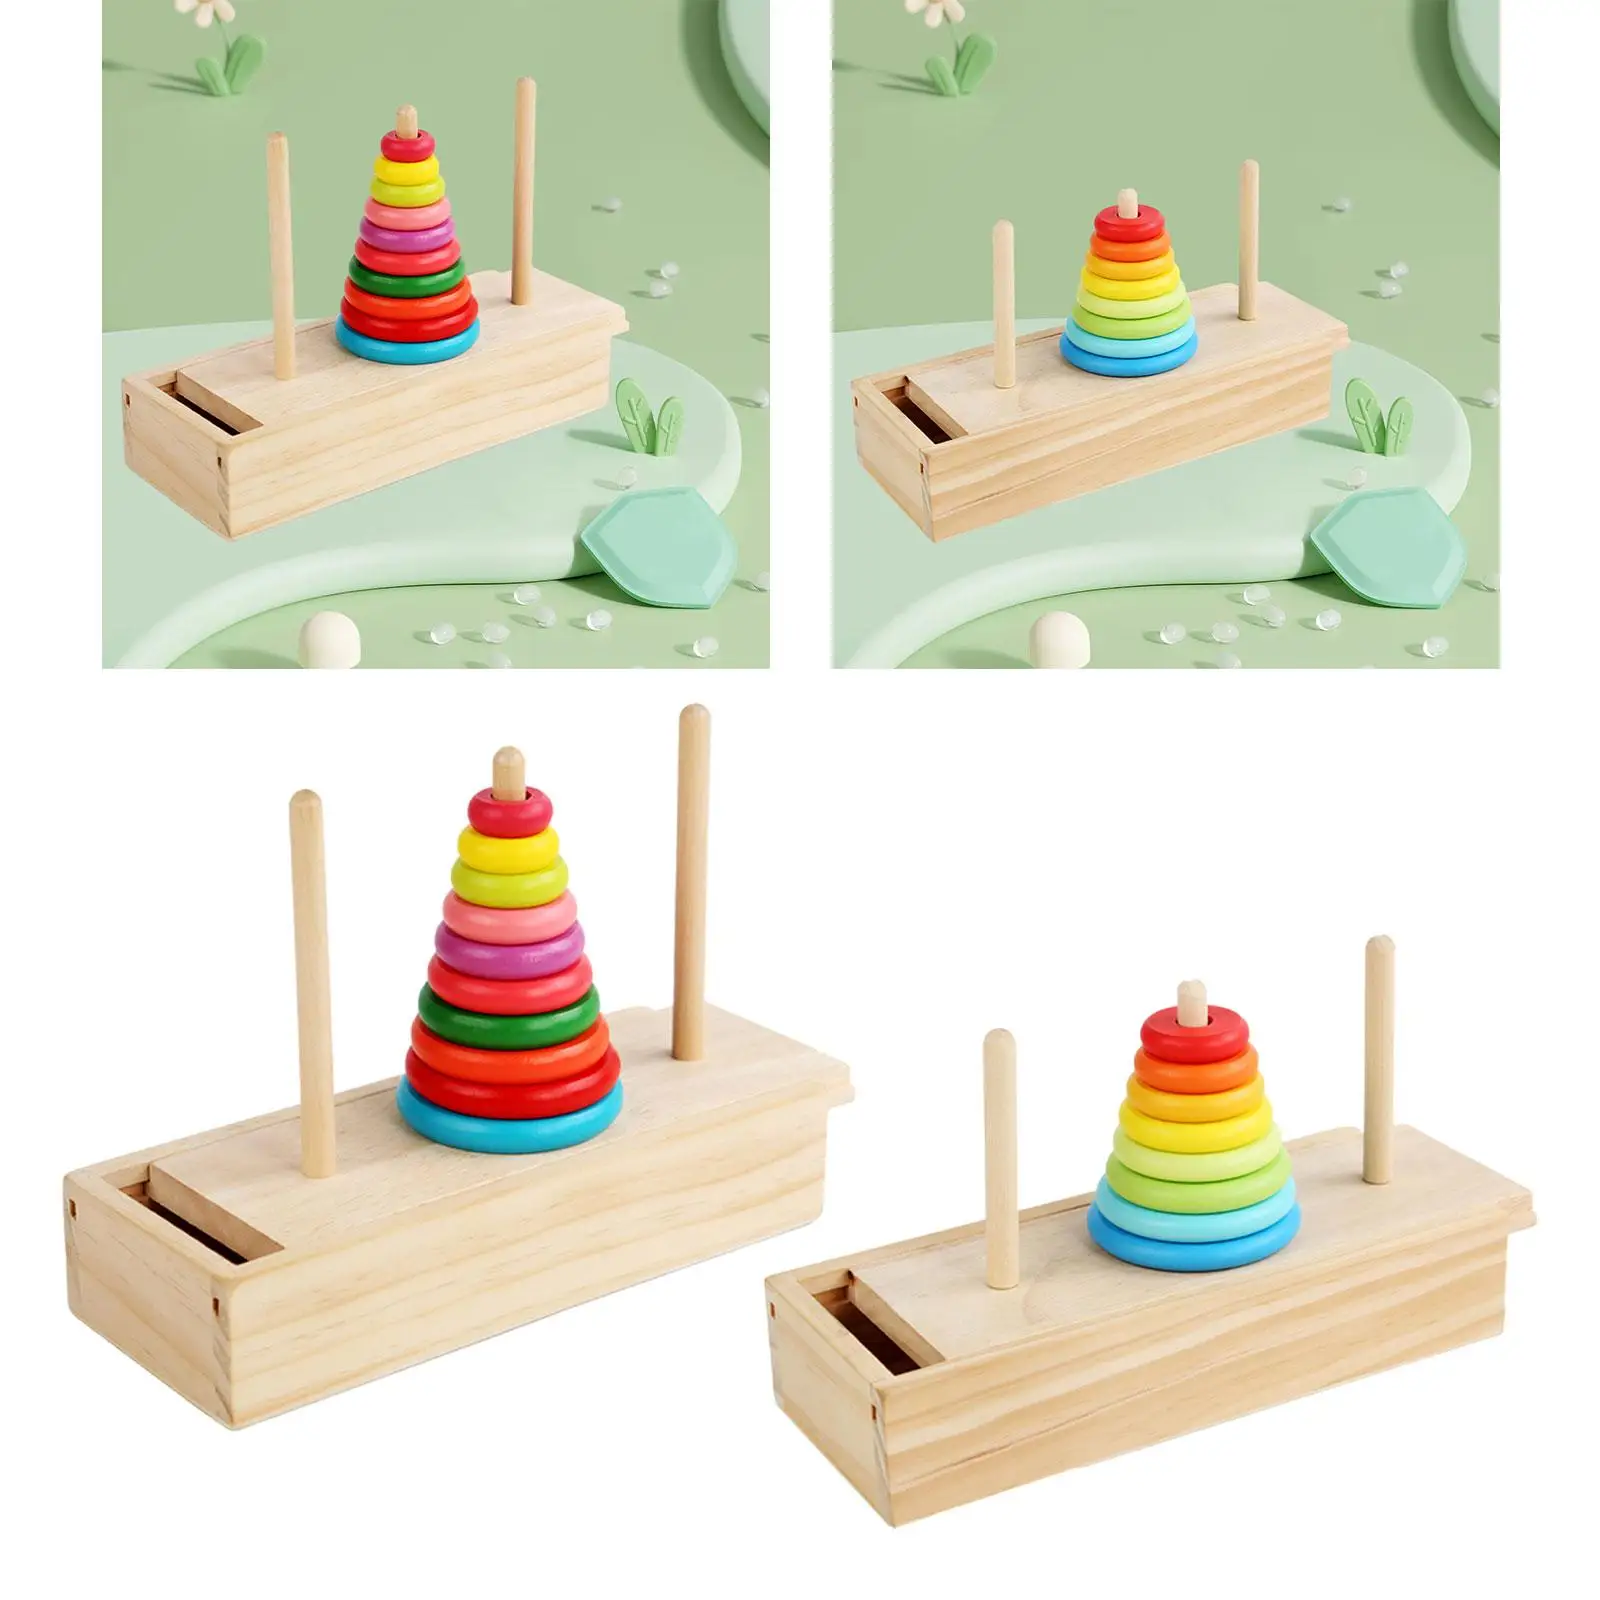 Wooden Stacking Tower Clearance Toys Color Cognition Mathematical Game Portable for 3 Year Old and up Children